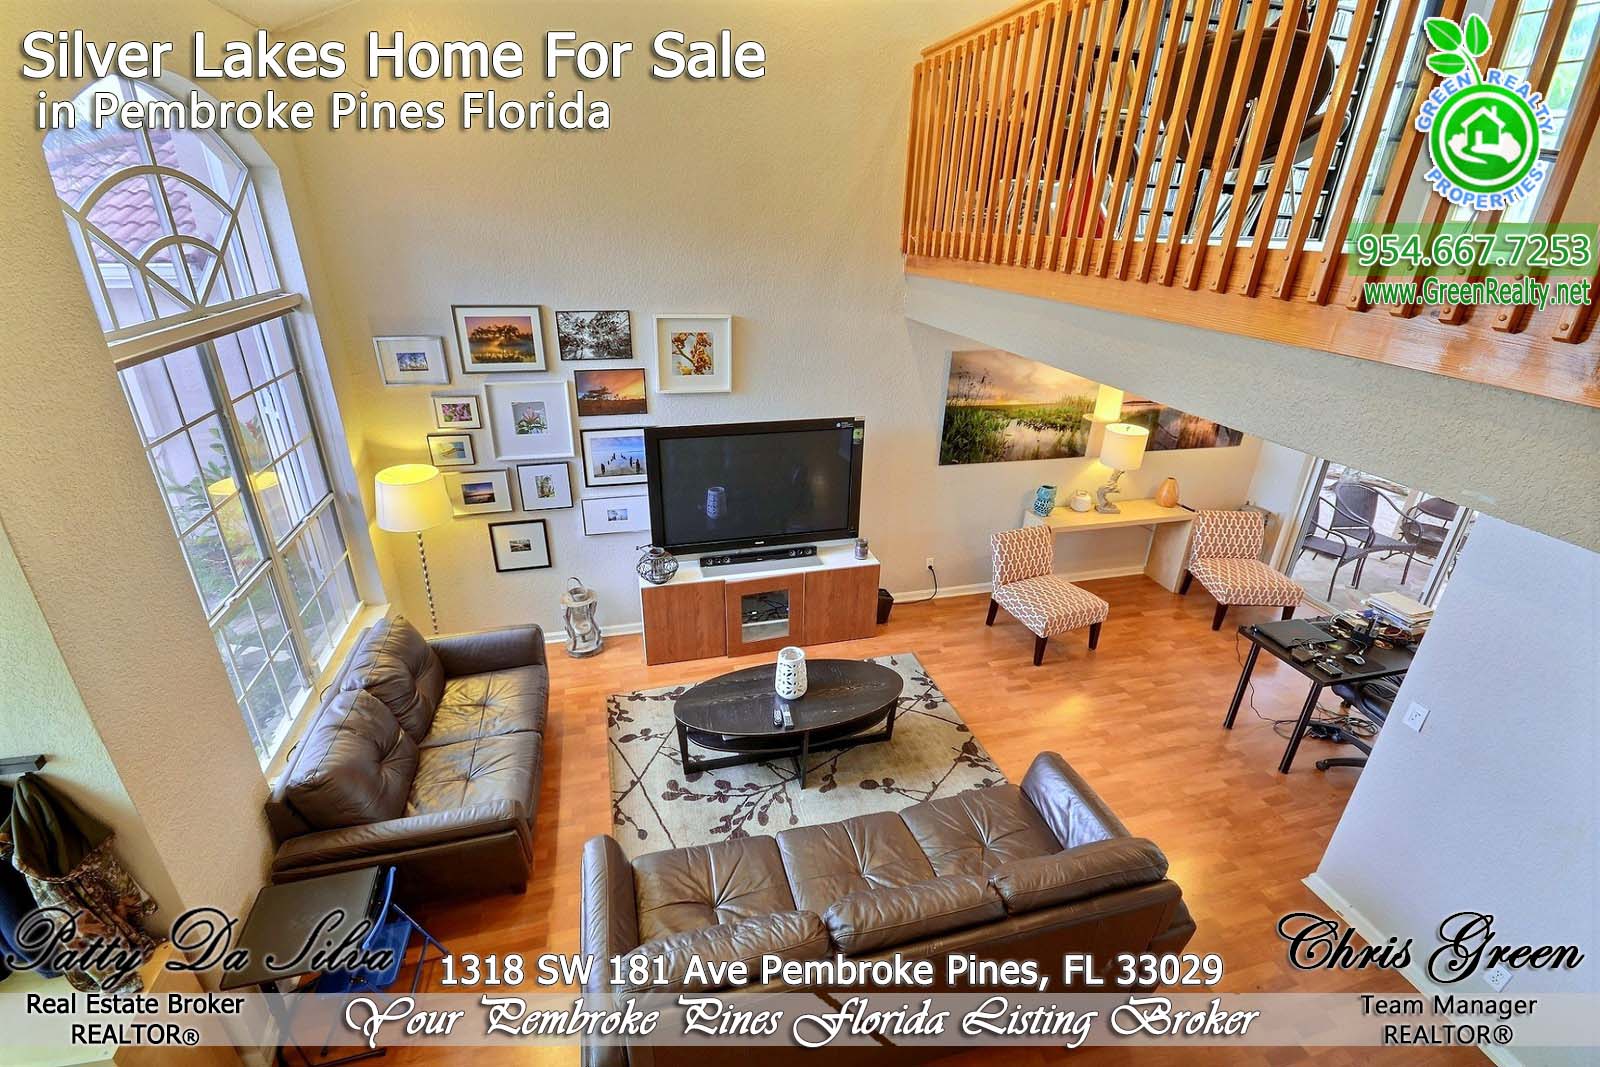 6 Silver Lakes Pembroke Pines Homes For Sale (3)